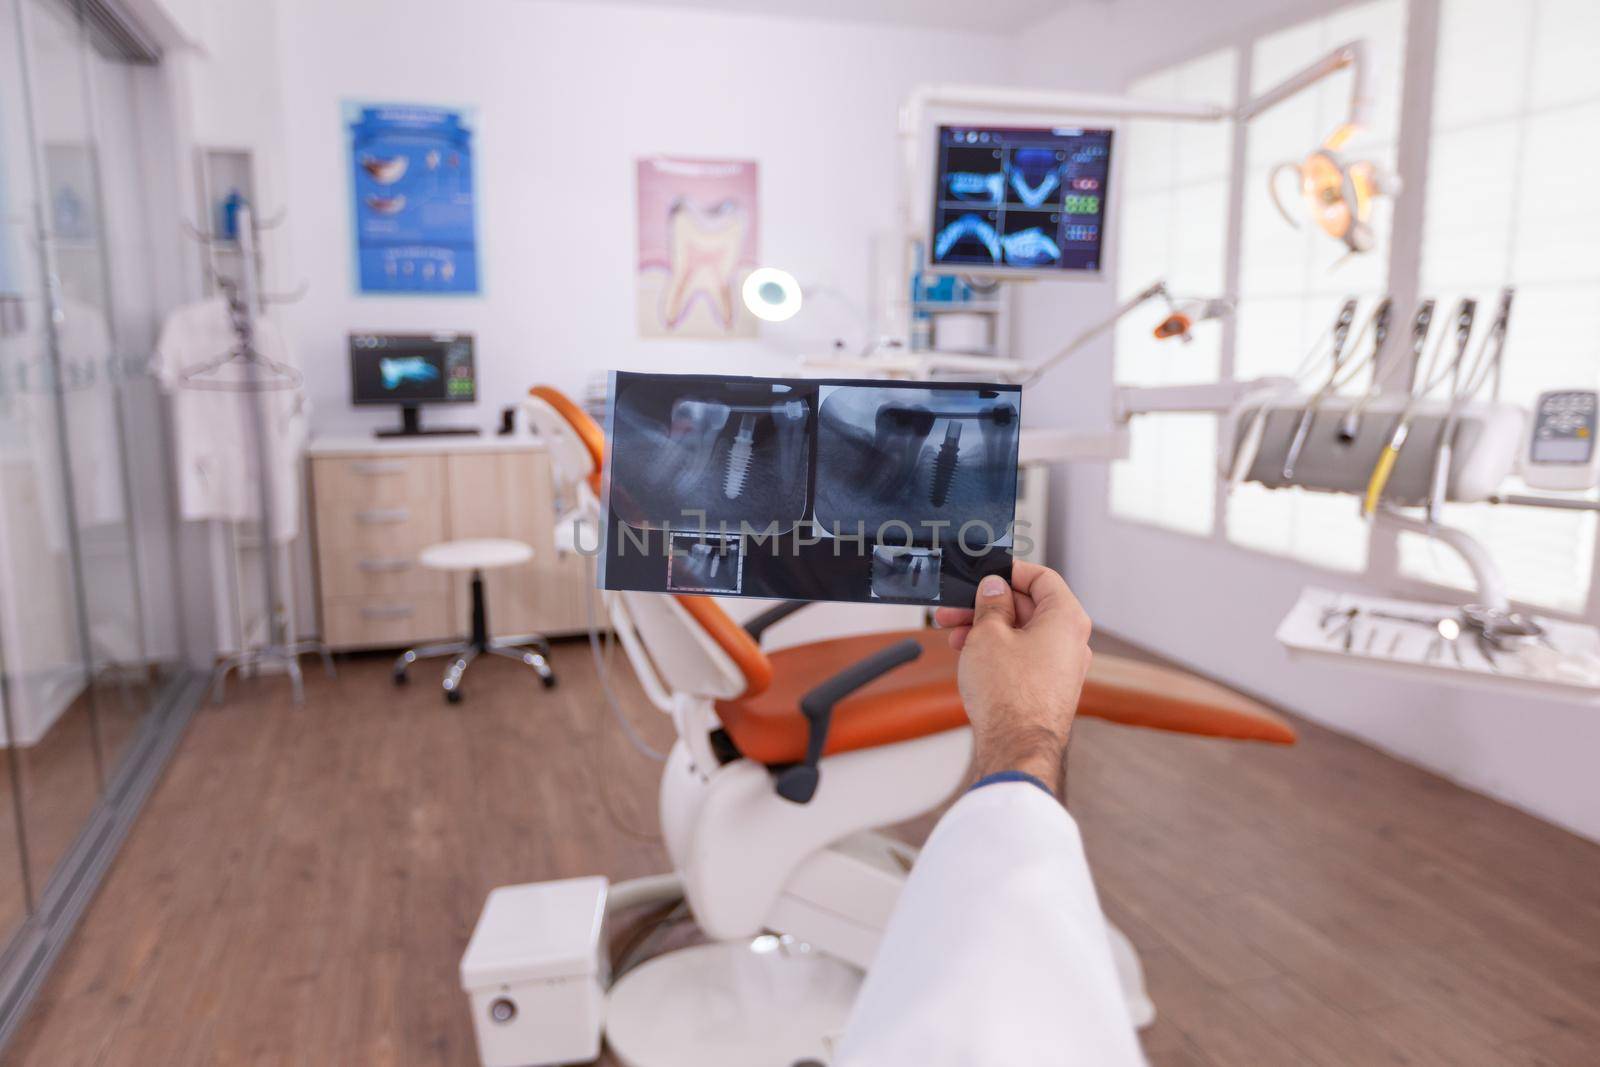 Radiologist dentist doctor holding medical teeth radiography working in stomatology hospital office examination room. Specialist orthodontist analyzing tooth jaw after oral dental surgery